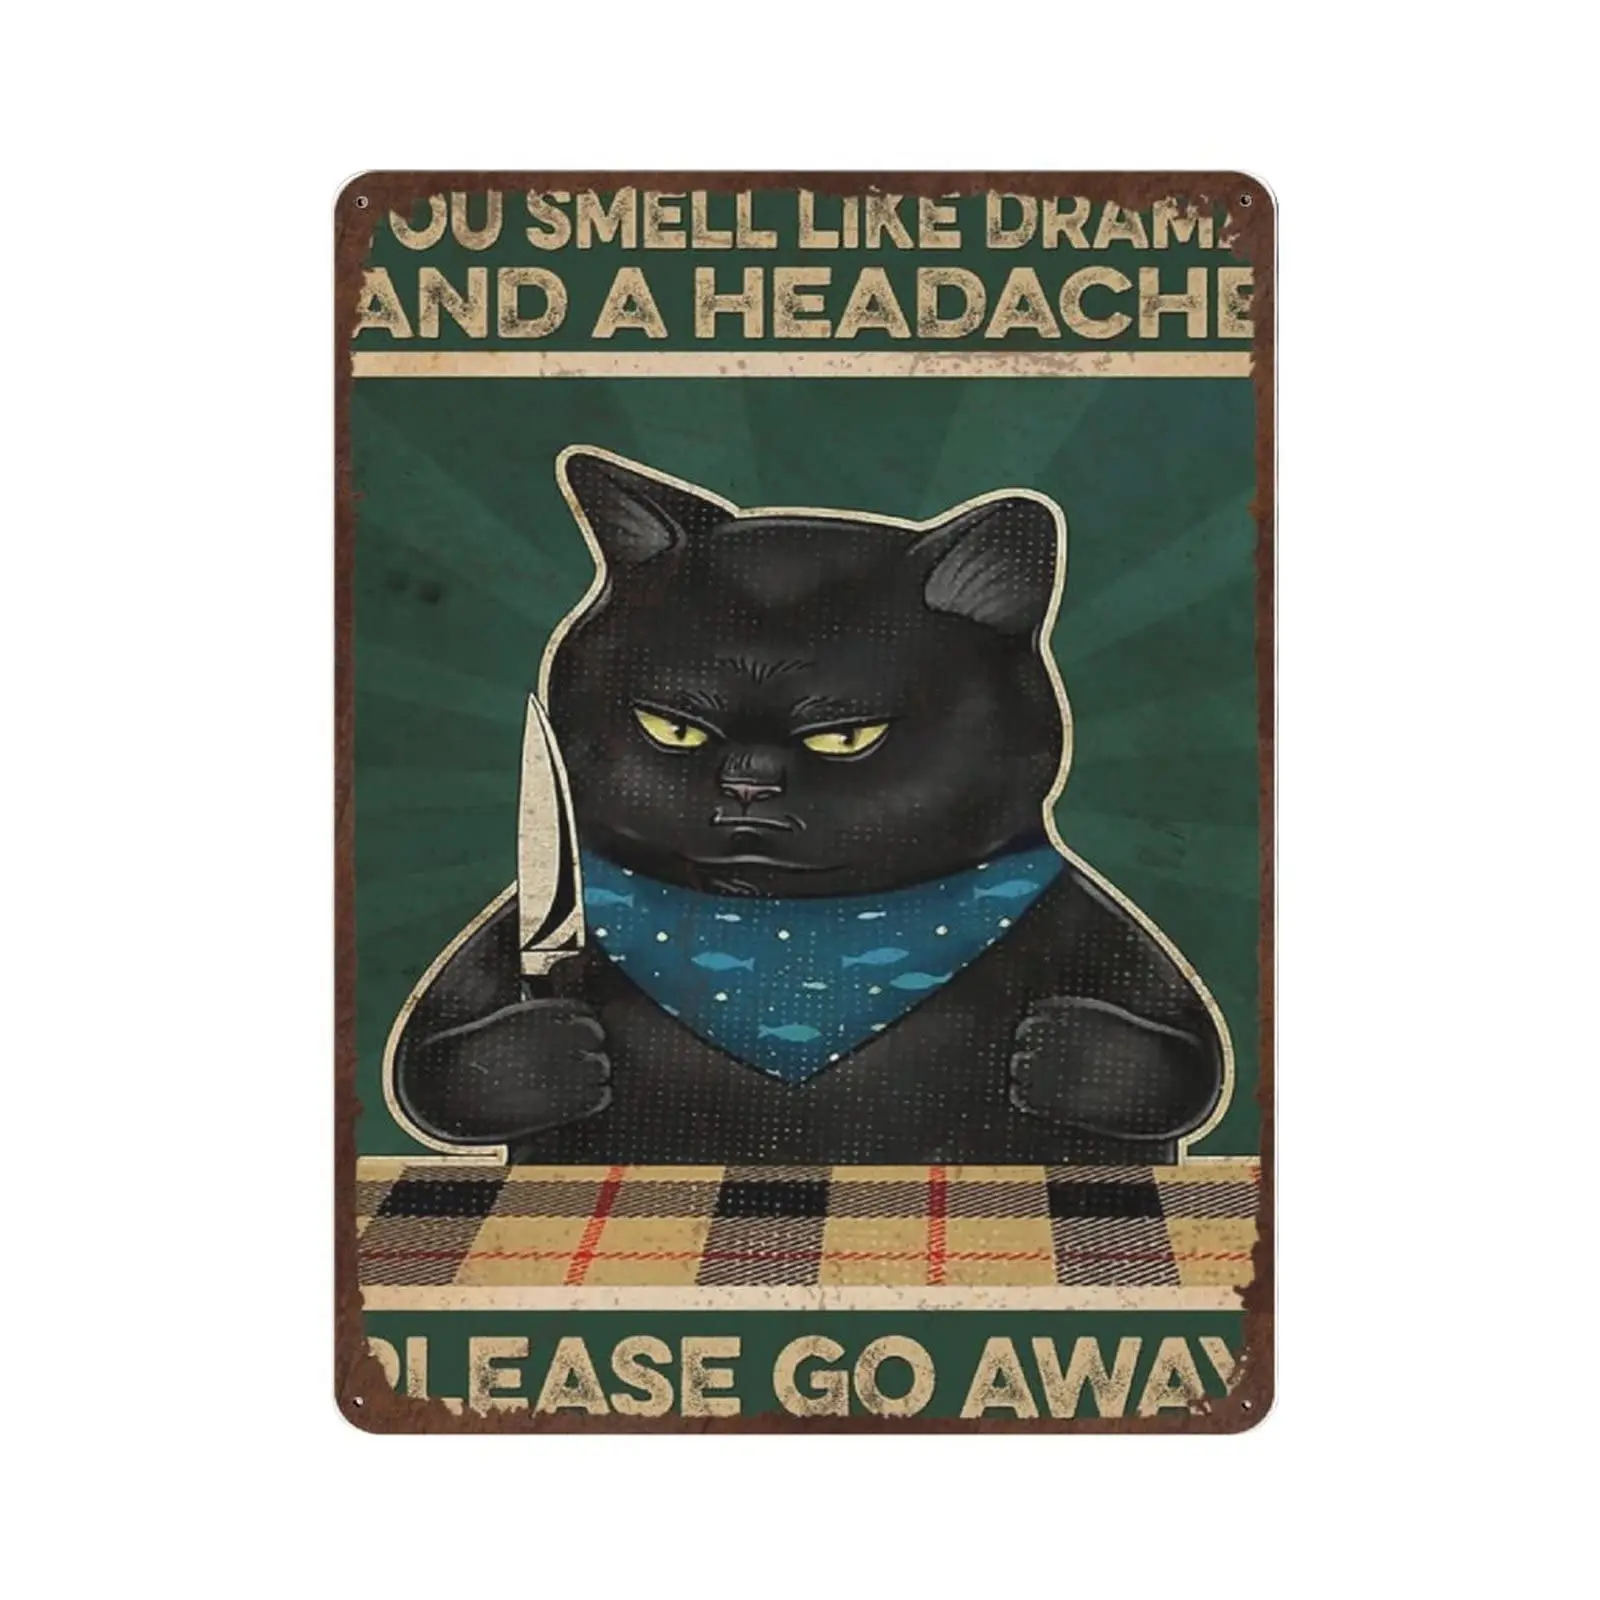 

Antique Durable Thick Metal Sign,Love Cat You Smell Like Drama and A Headache Please Go Away Tin Sign,Vintage Wall Decor，Novelty